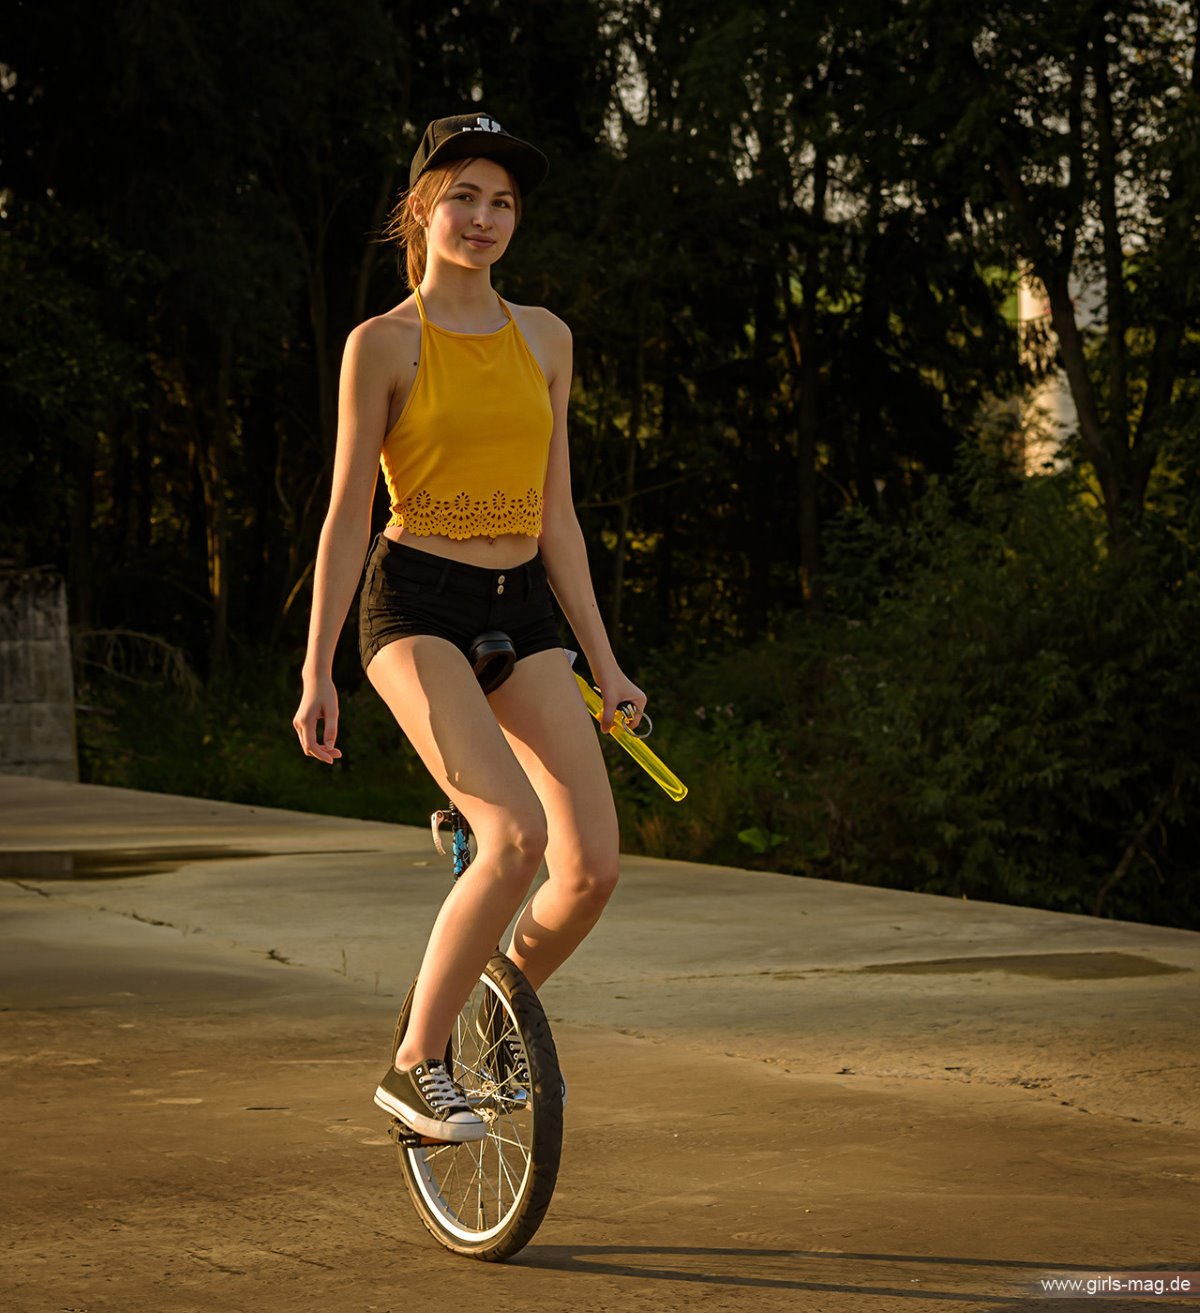 Girls Mag Annika Bubbles on a Unicycle 0038 9642072995.jpg